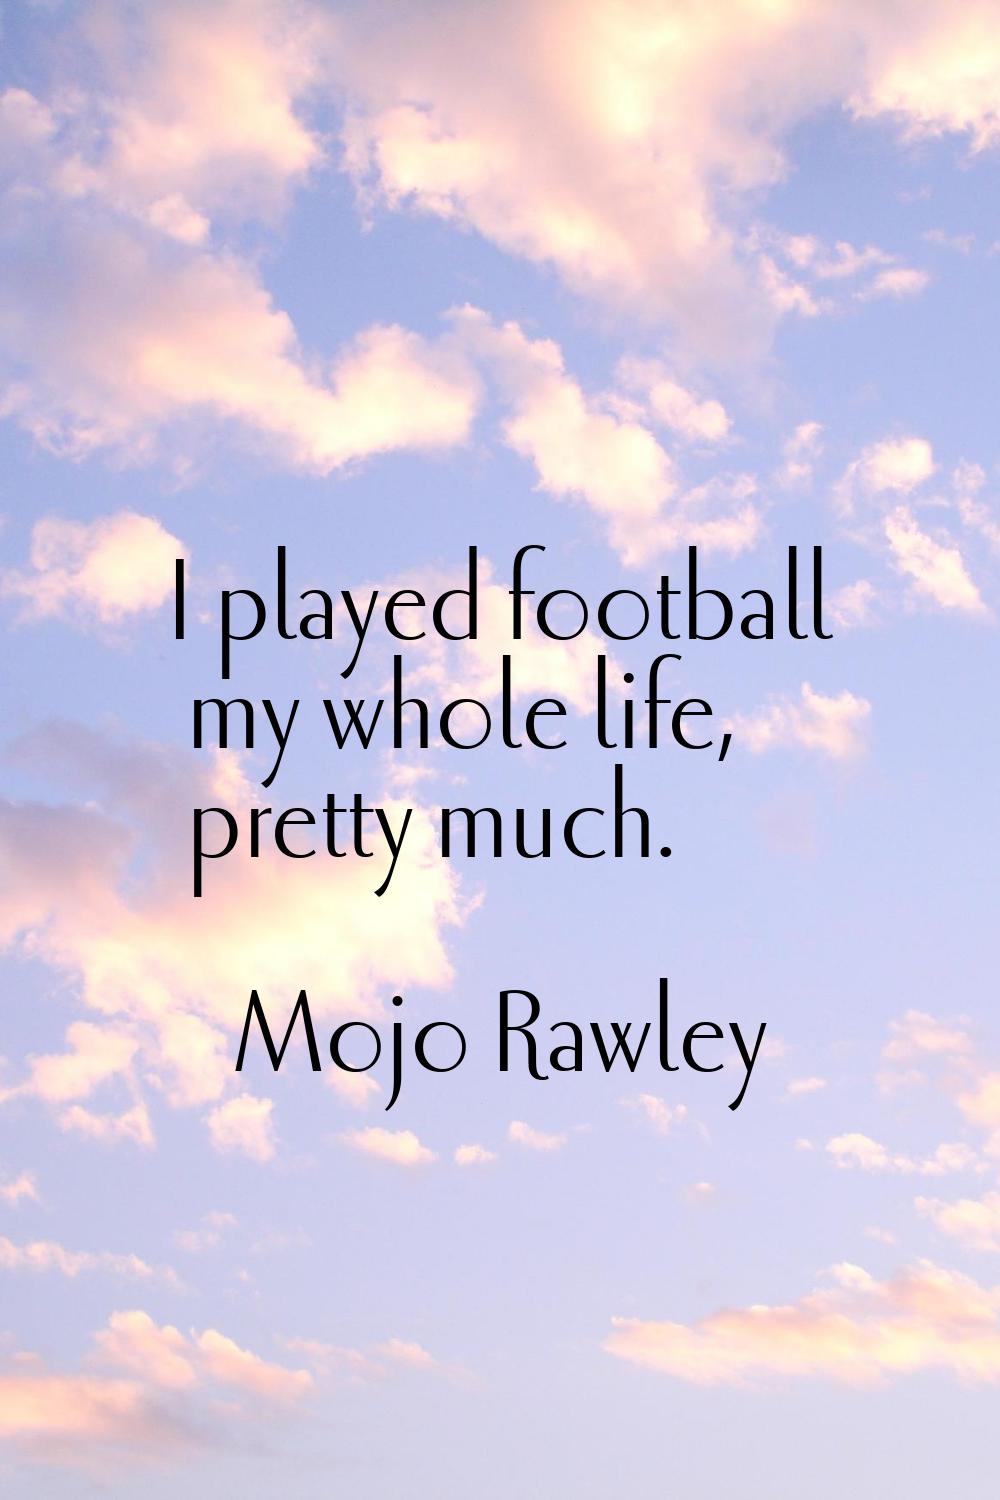 I played football my whole life, pretty much.